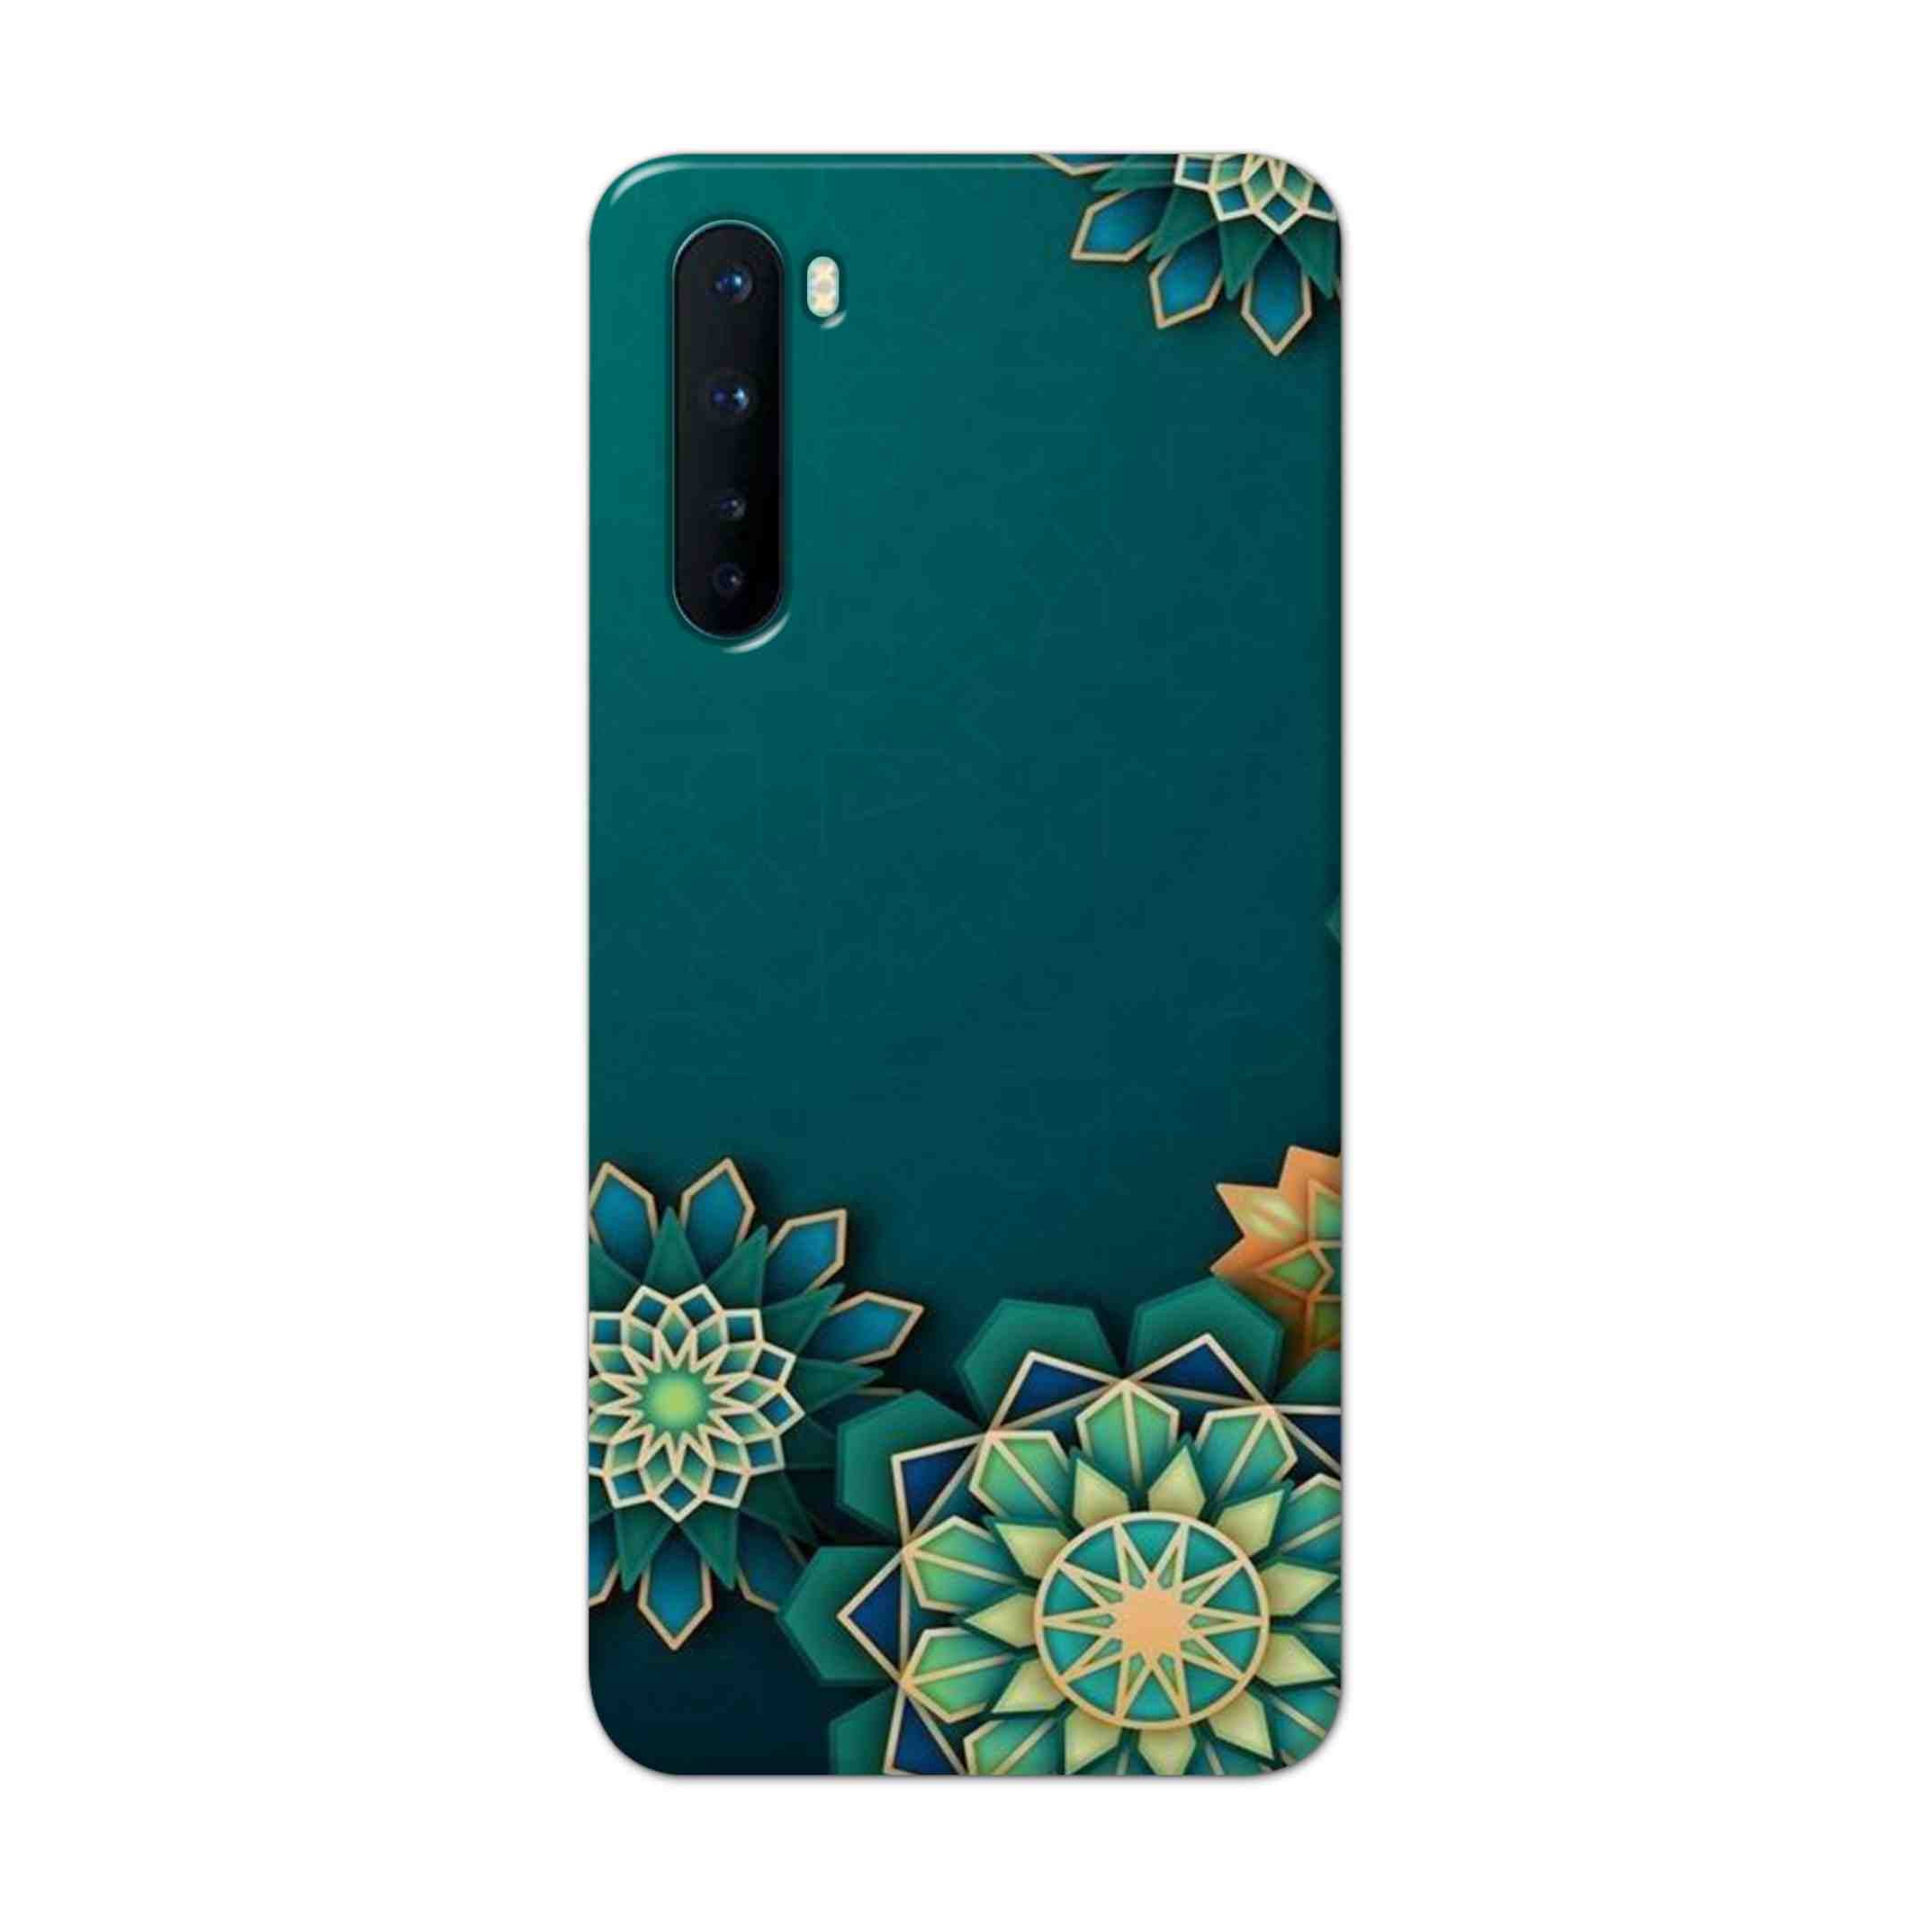 Buy Green Flower Hard Back Mobile Phone Case Cover For OnePlus Nord Online